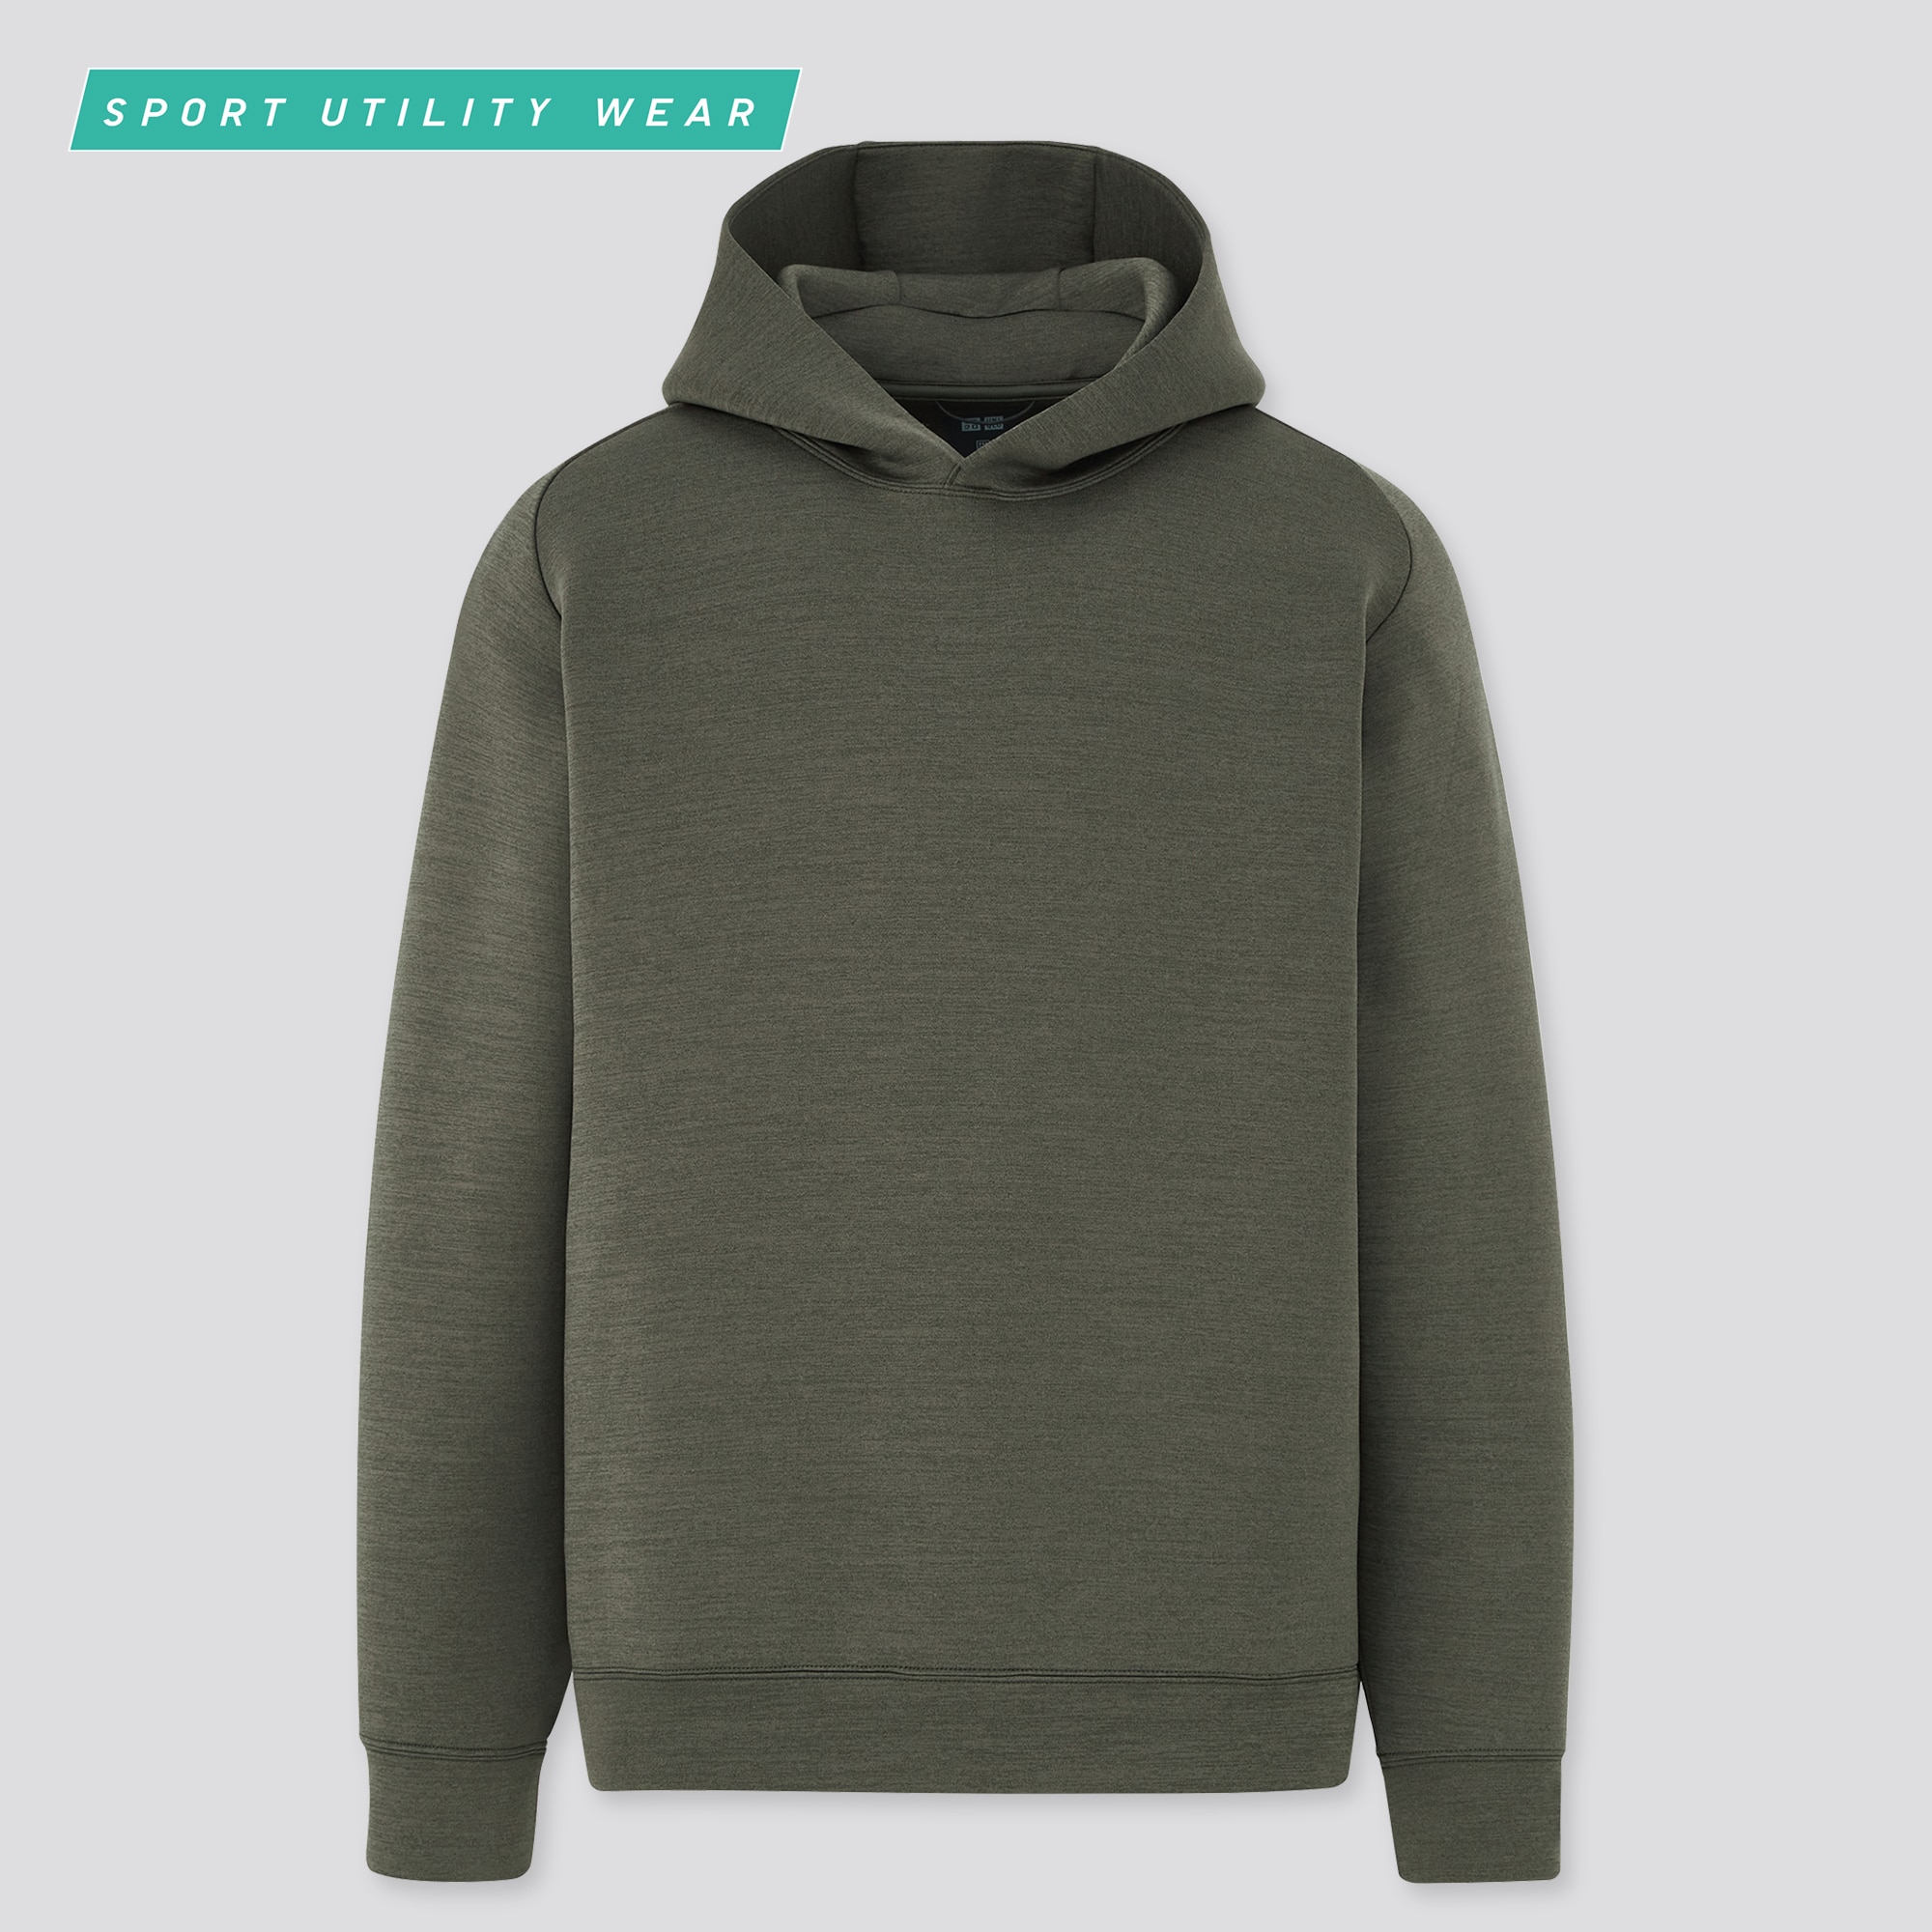 Check styling ideas for「Ultra Stretch Dry Sweat Pullover Hoodie